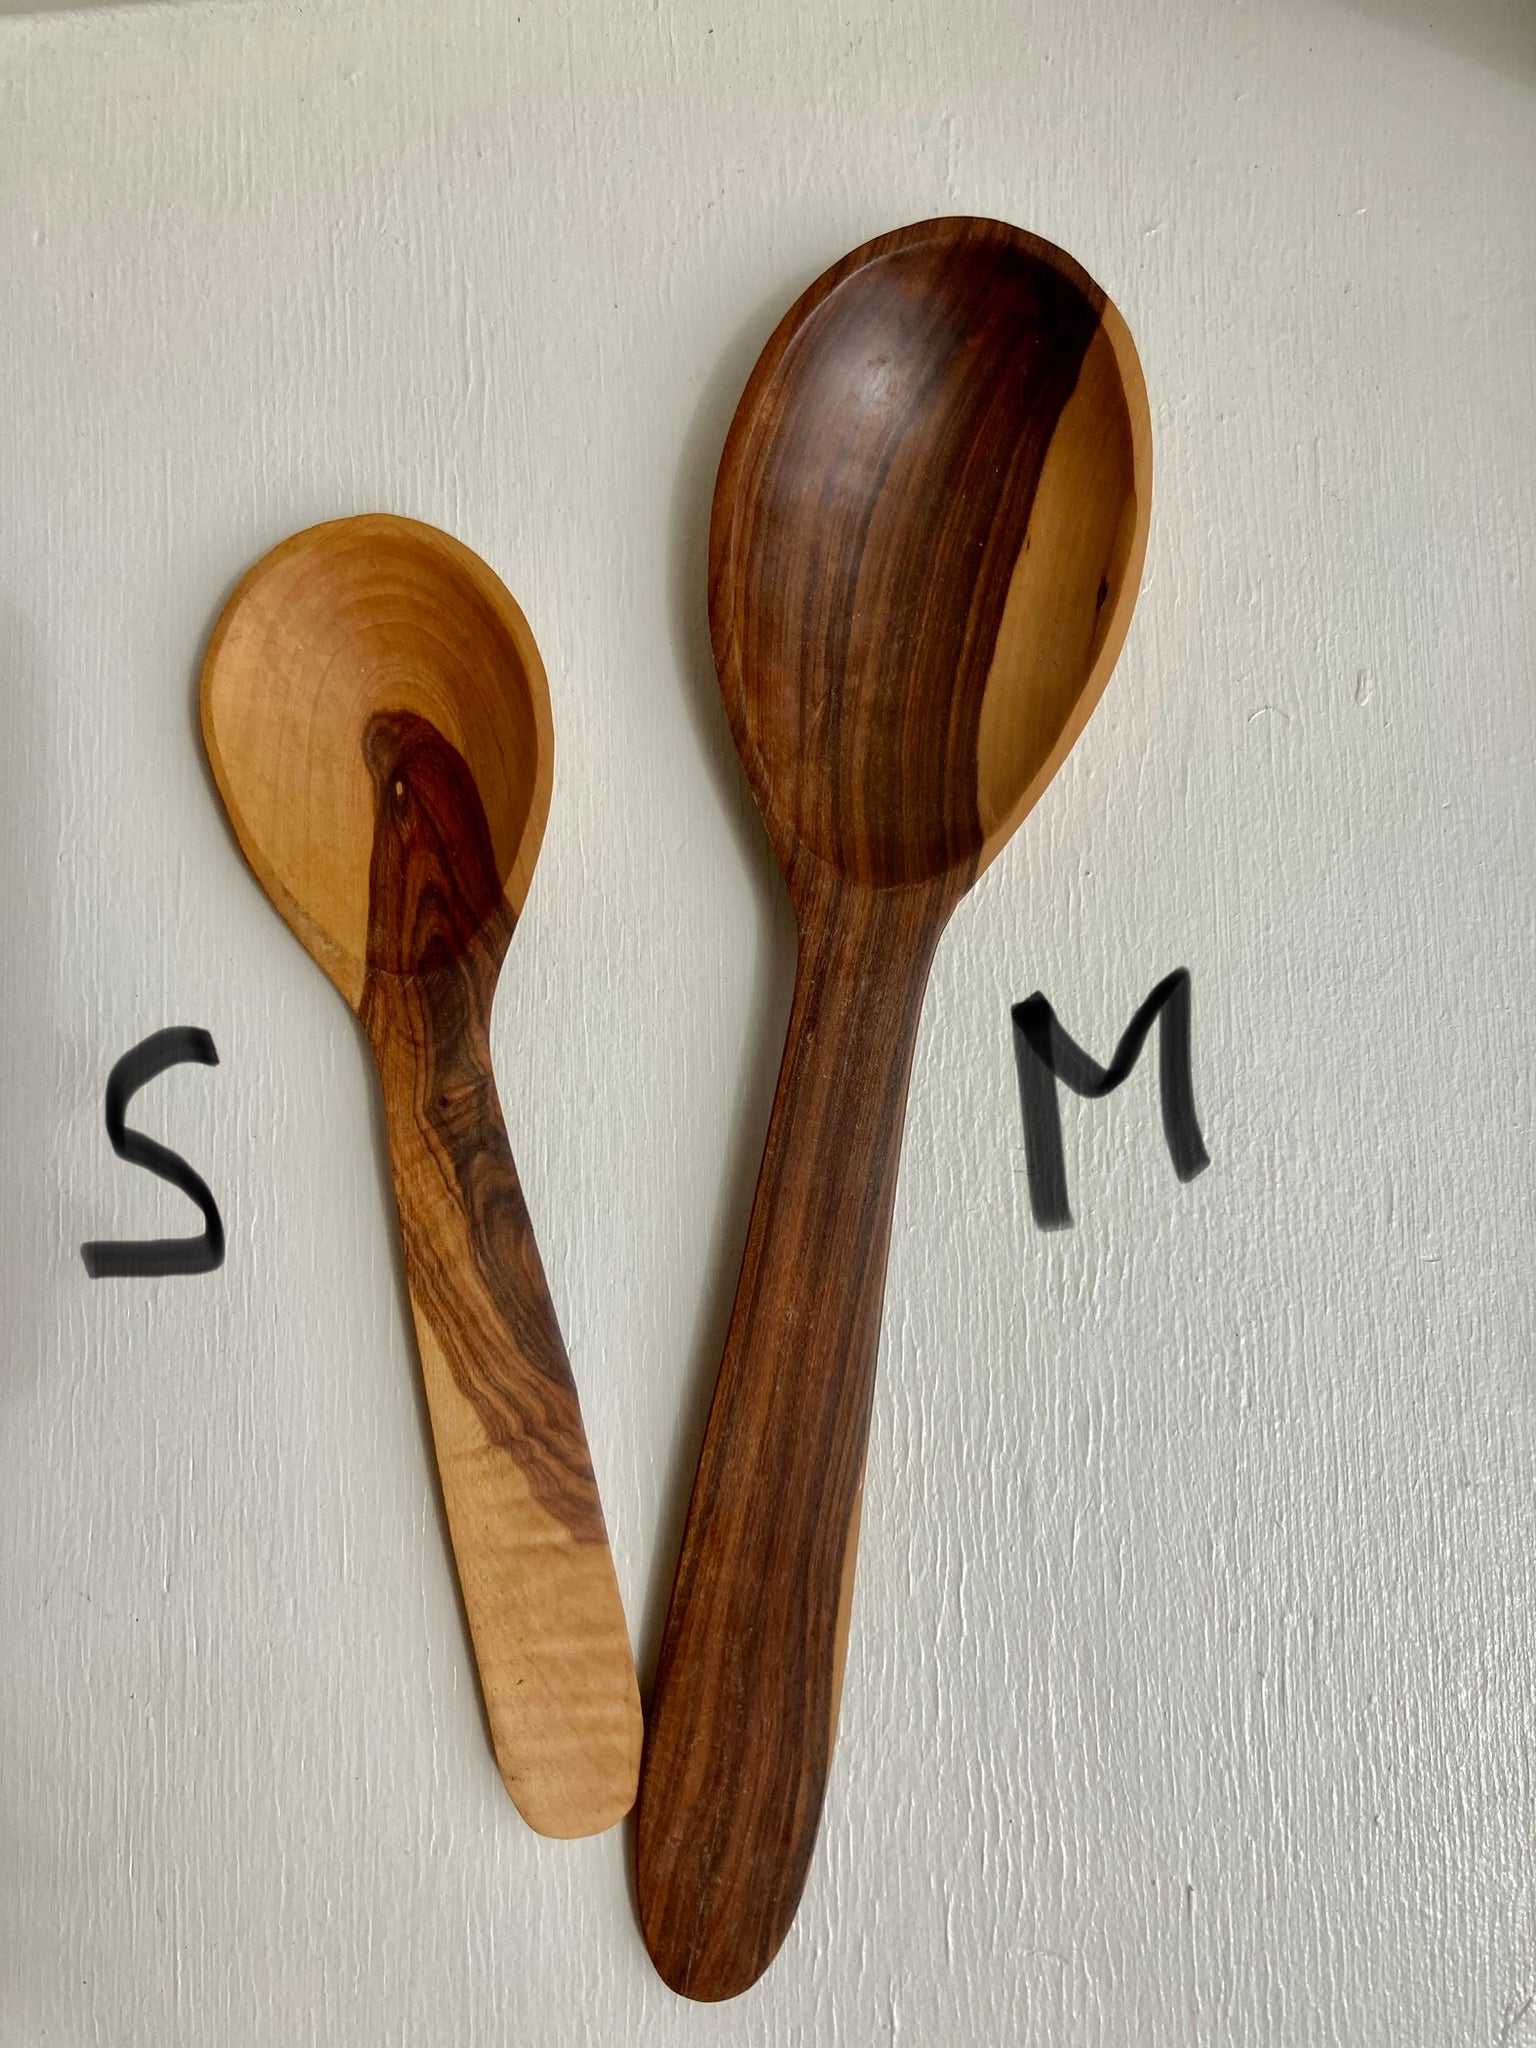 Spoon - Small wooden spoon, hand-carved in Colombia